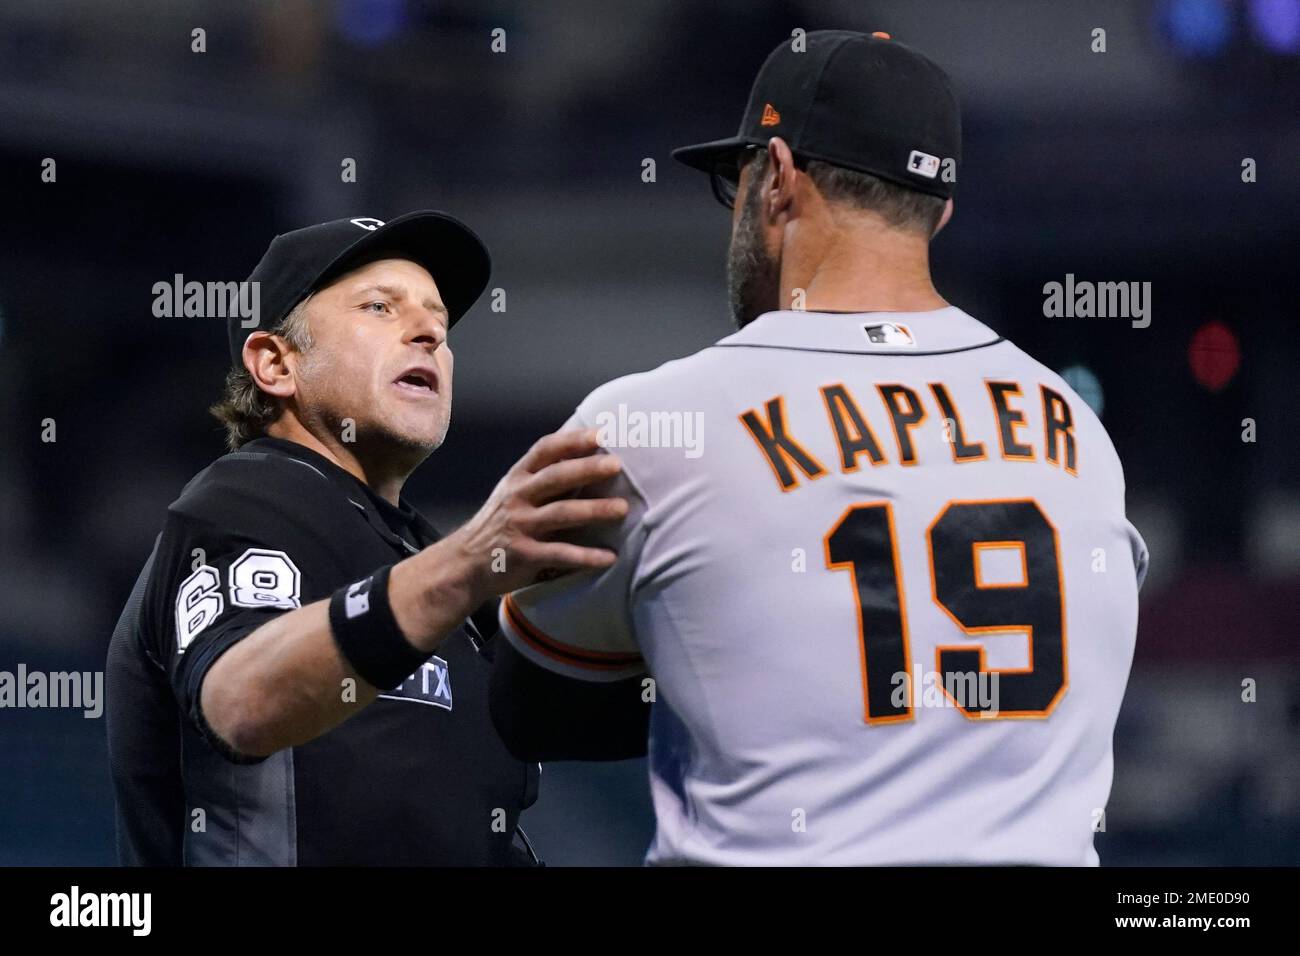 Umpire Chris Guccione, left, explains a call on the field as San Francisco Giants manager Gabe Kapler (19) listens during the eighth inning of a baseball game against the Arizona Diamondbacks, Tuesday, Aug. 3, 2021, in Phoenix. (AP Photo/Ross D. Franklin) Stock Photo